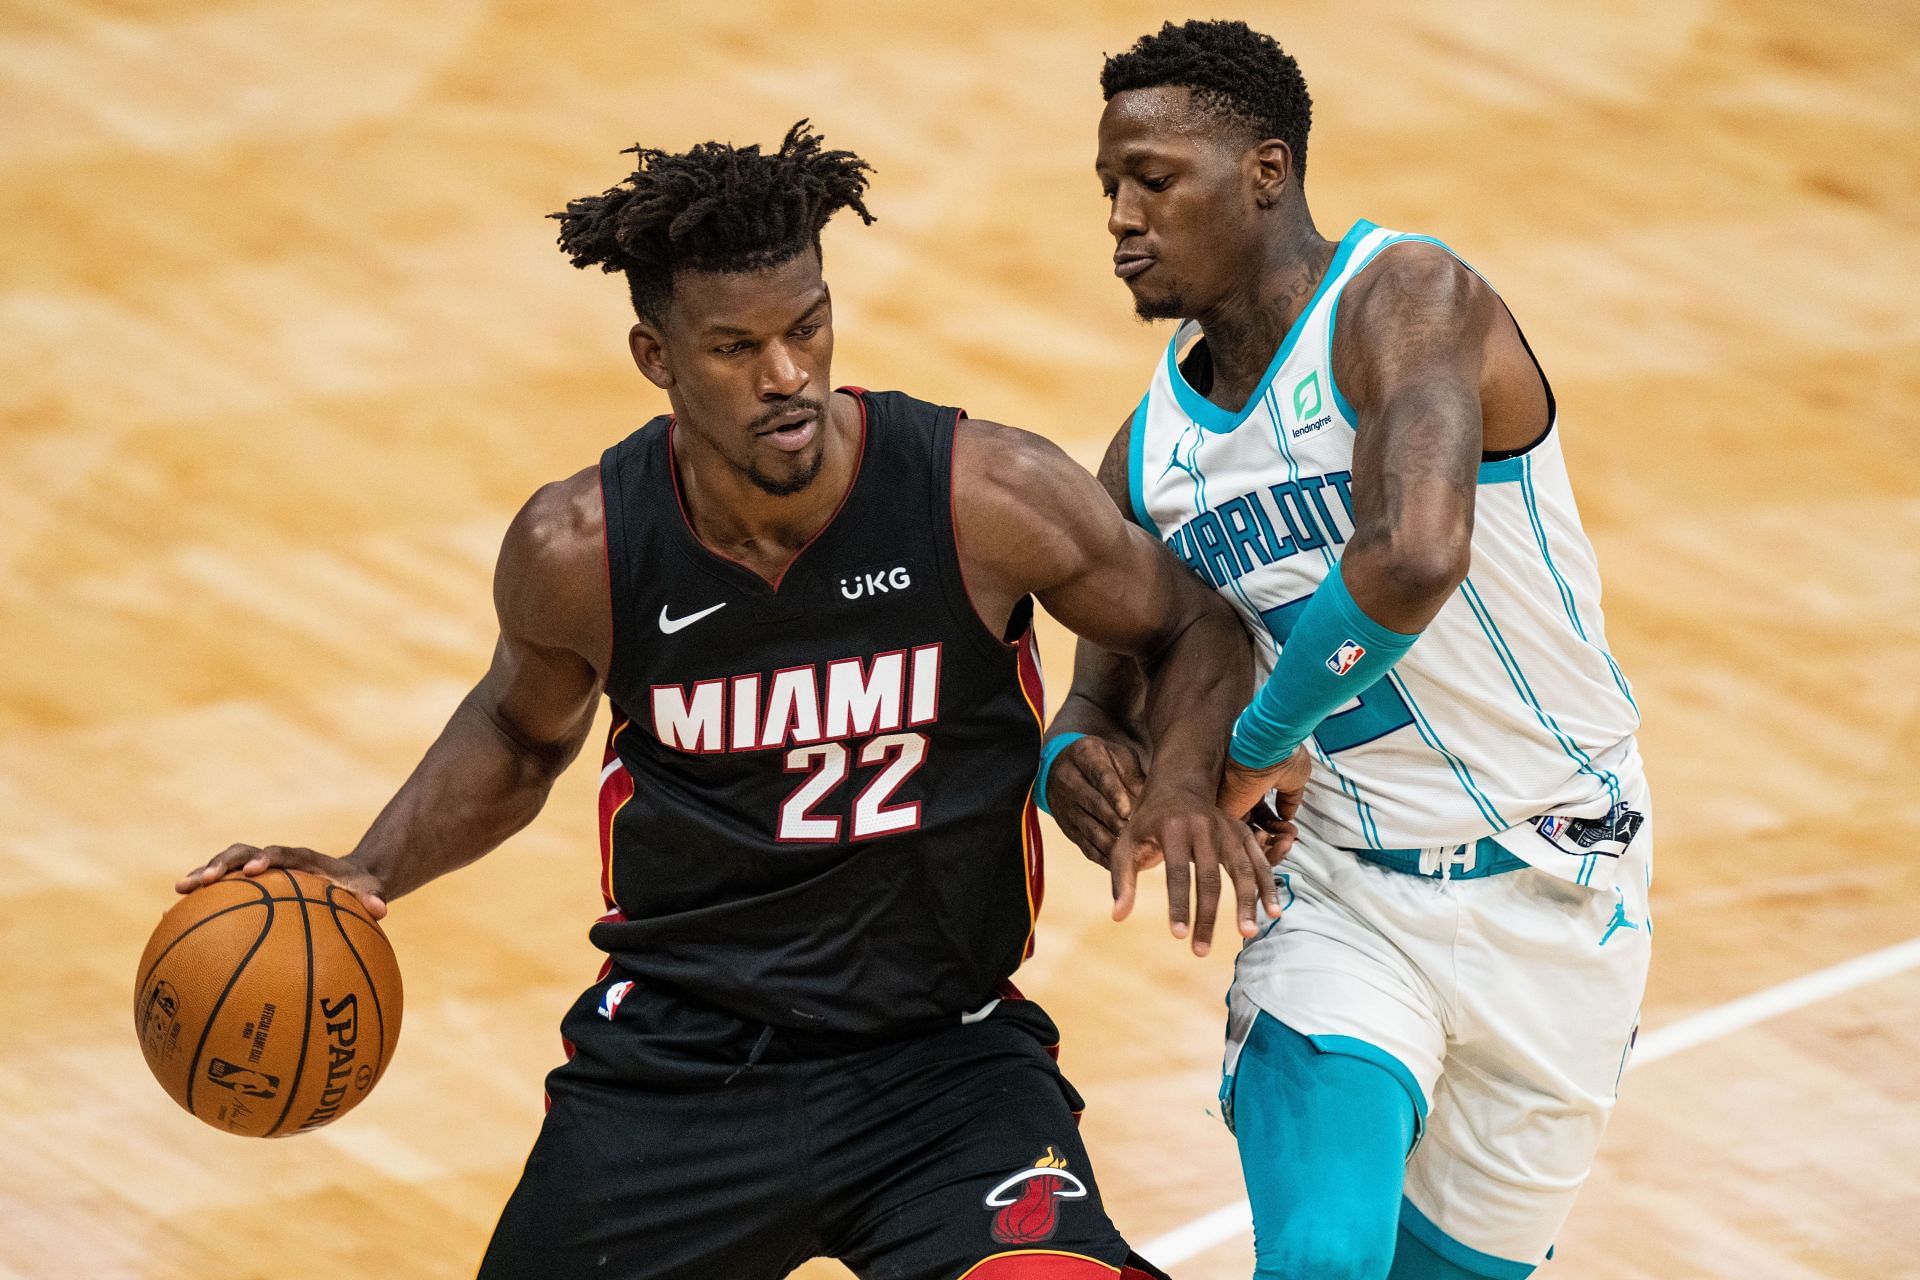 Miami Heat star Jimmy Butler with the ball